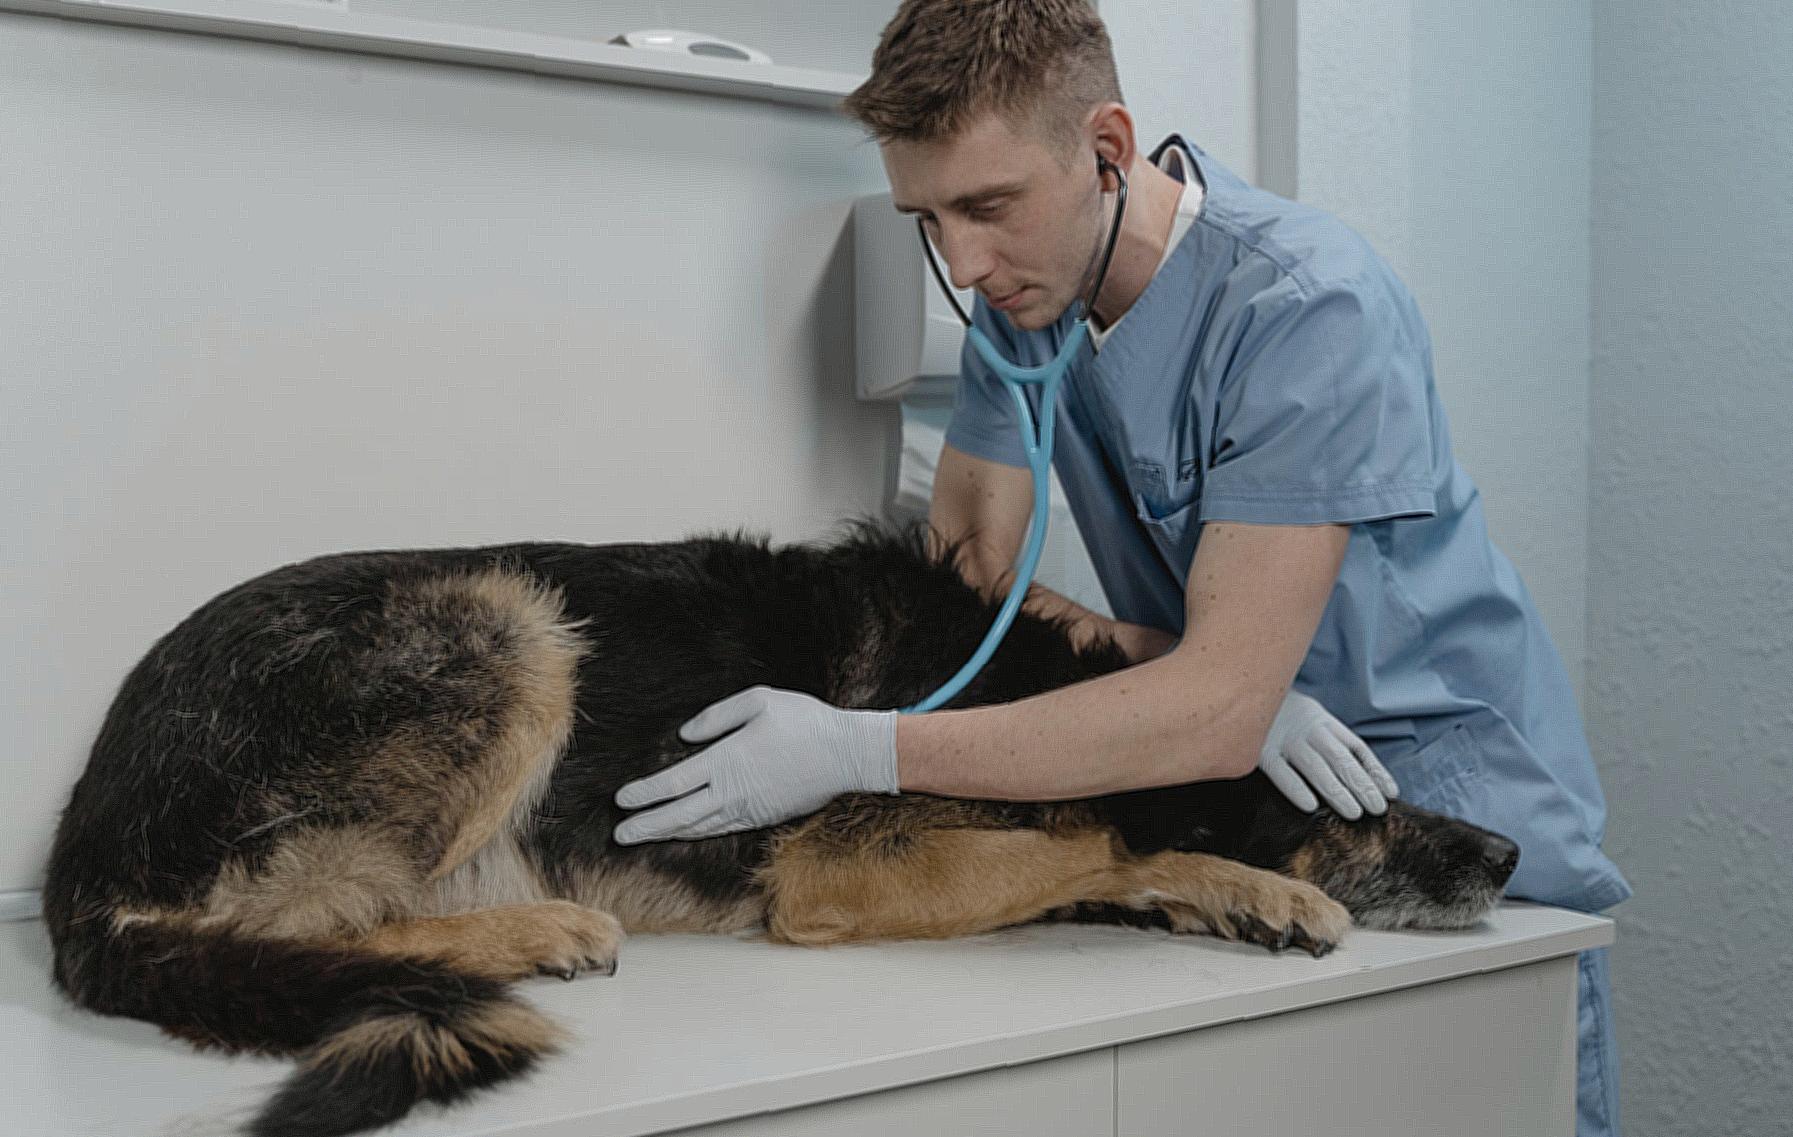 A Veterinarian Checking a Sick Dog Using a Stethoscope